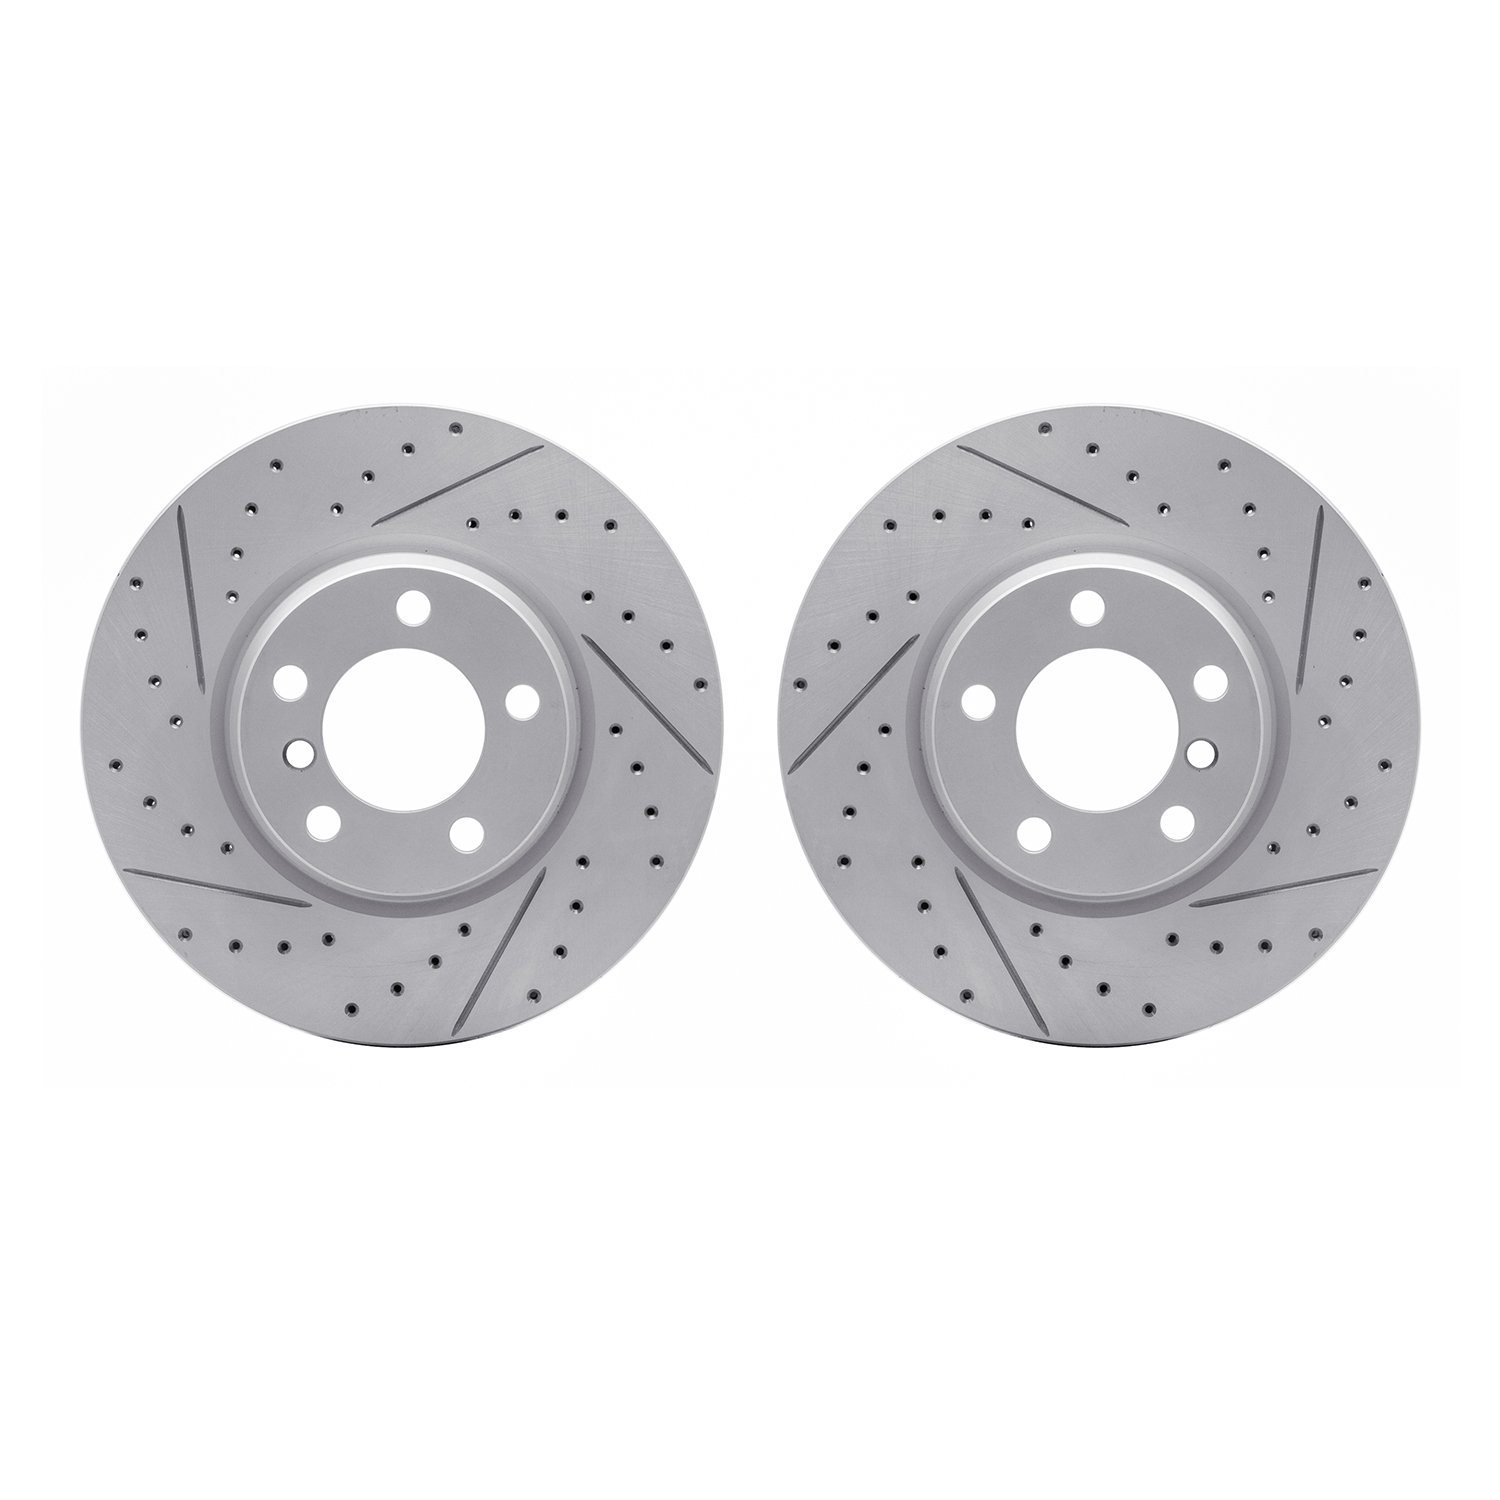 2002-31006 Geoperformance Drilled/Slotted Brake Rotors, 2012-2018 BMW, Position: Front